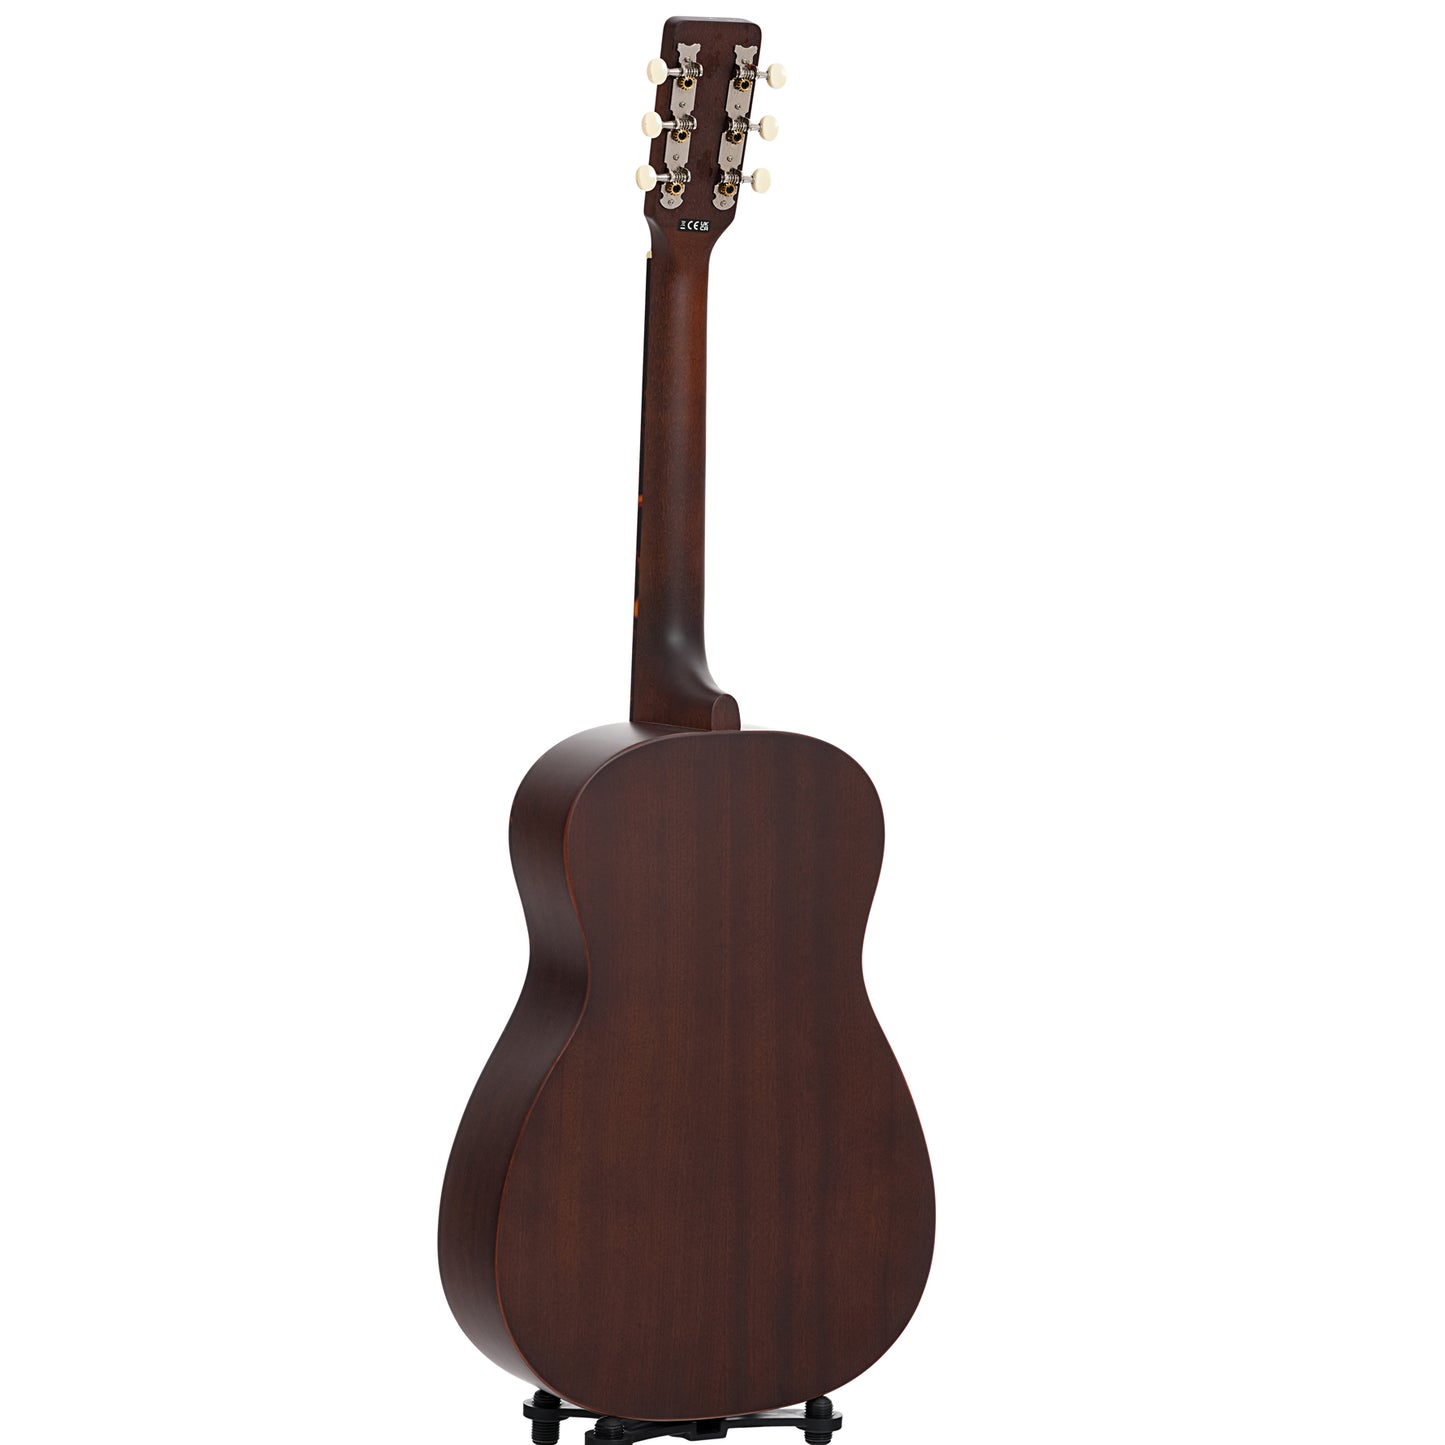 Full back and side of Gretsch Jim Dandy Deltoluxe Parlor Acoustic/Electric Guitar, Black Top